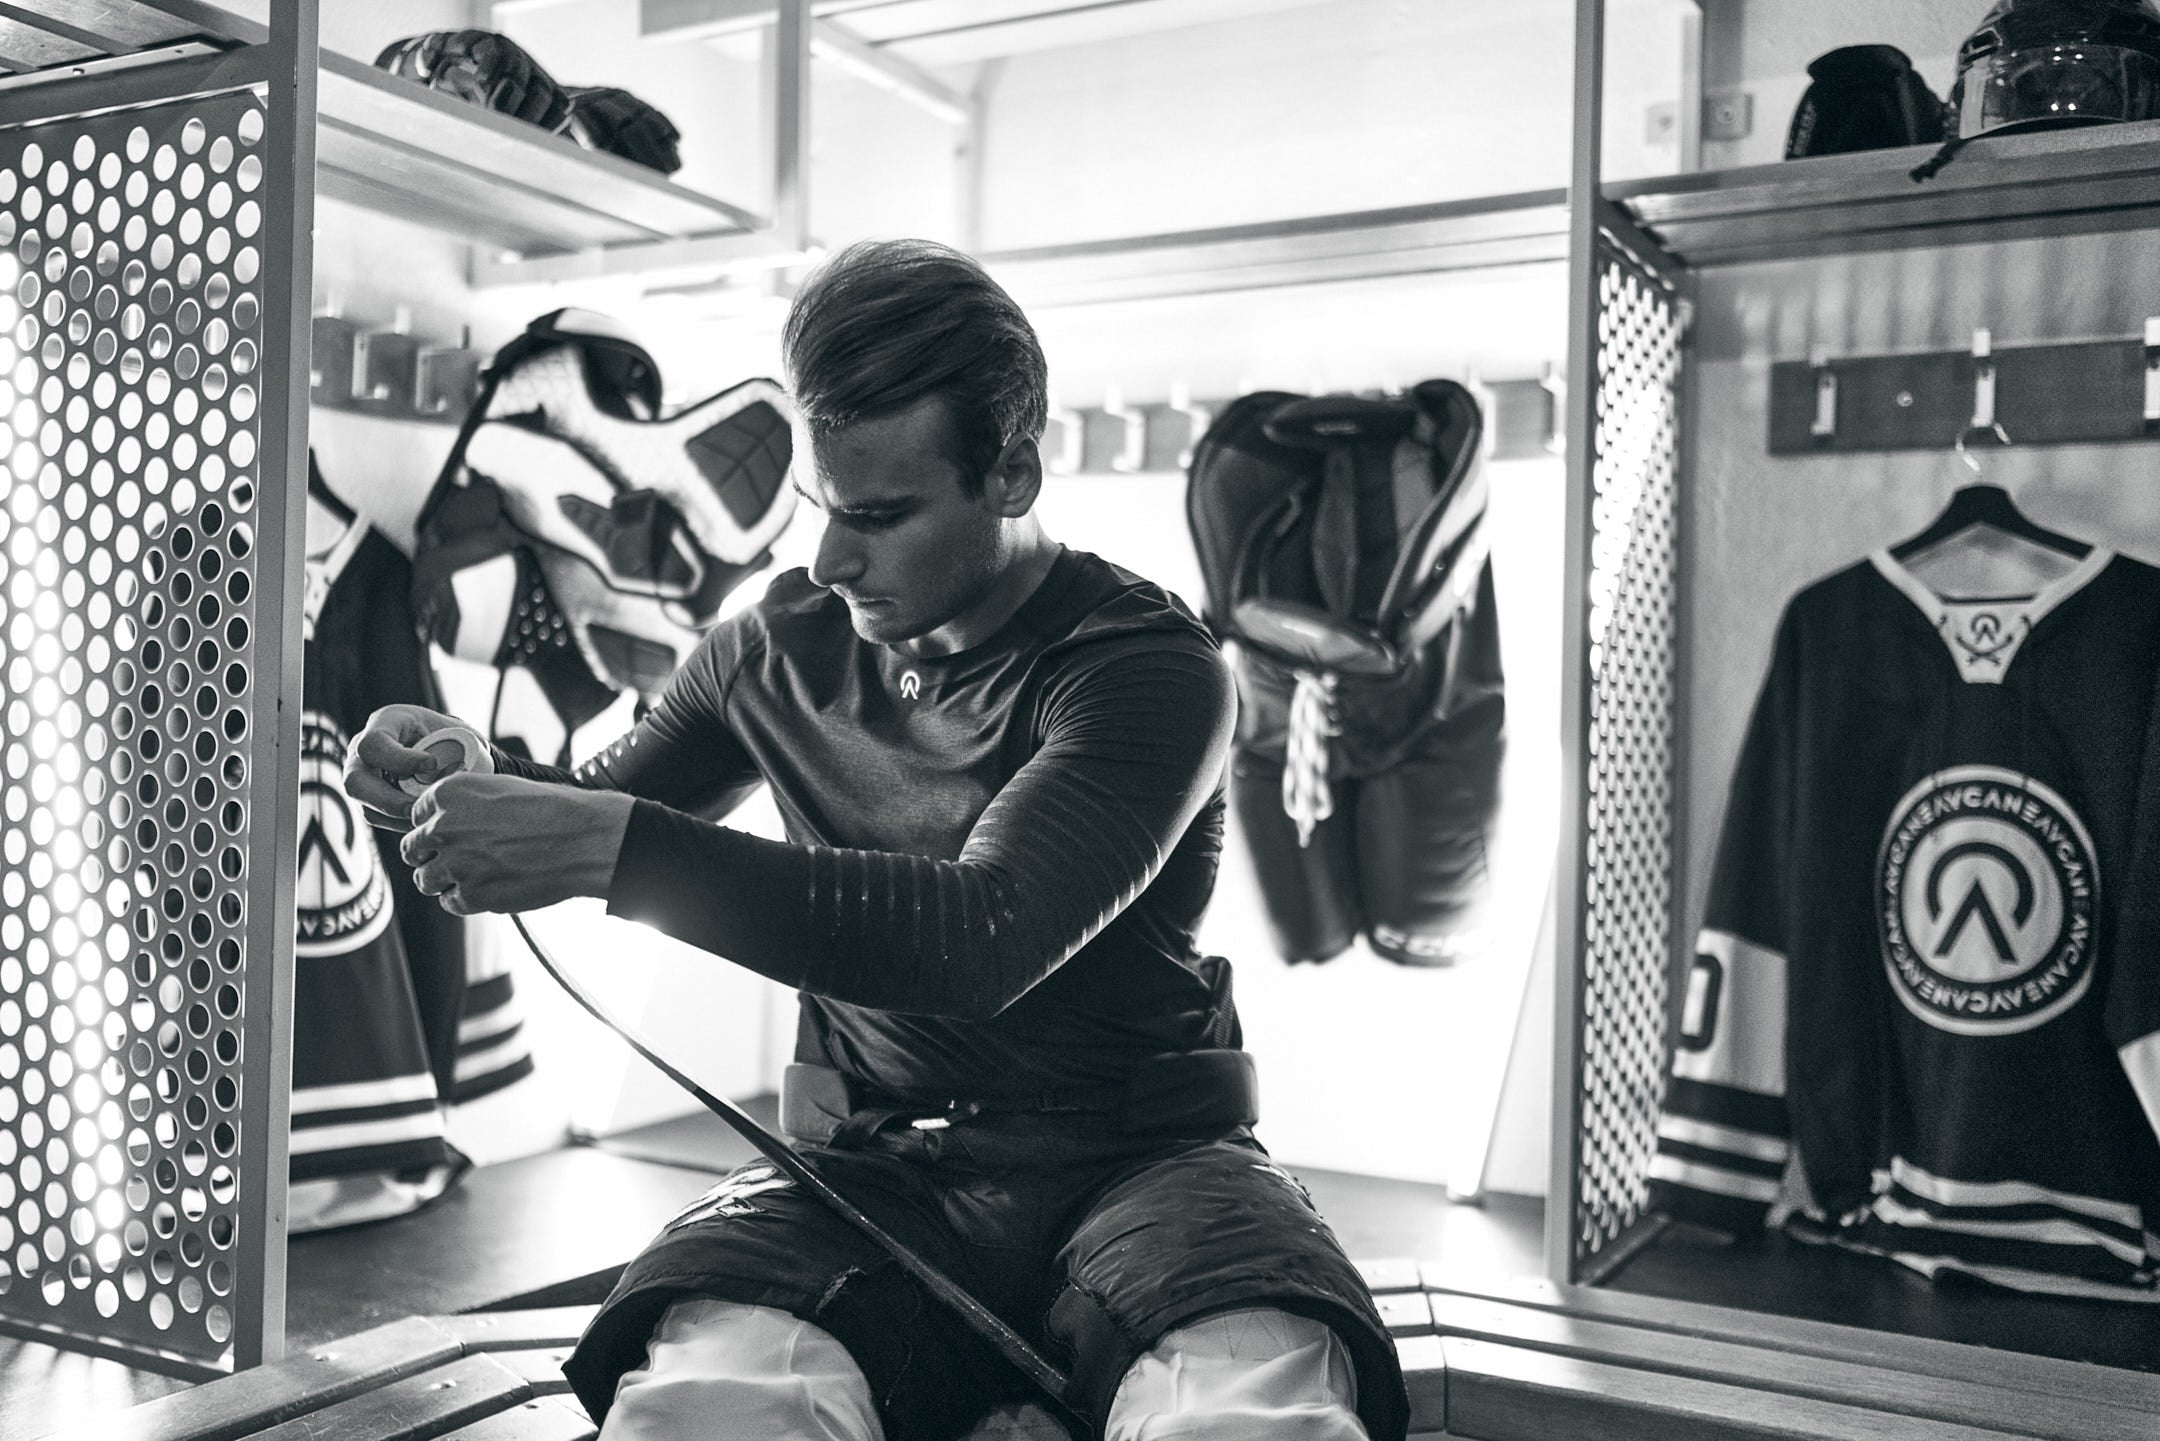 Tested by Pros: A Look at How NHL Players Trust Our Cut-Resistant Gear